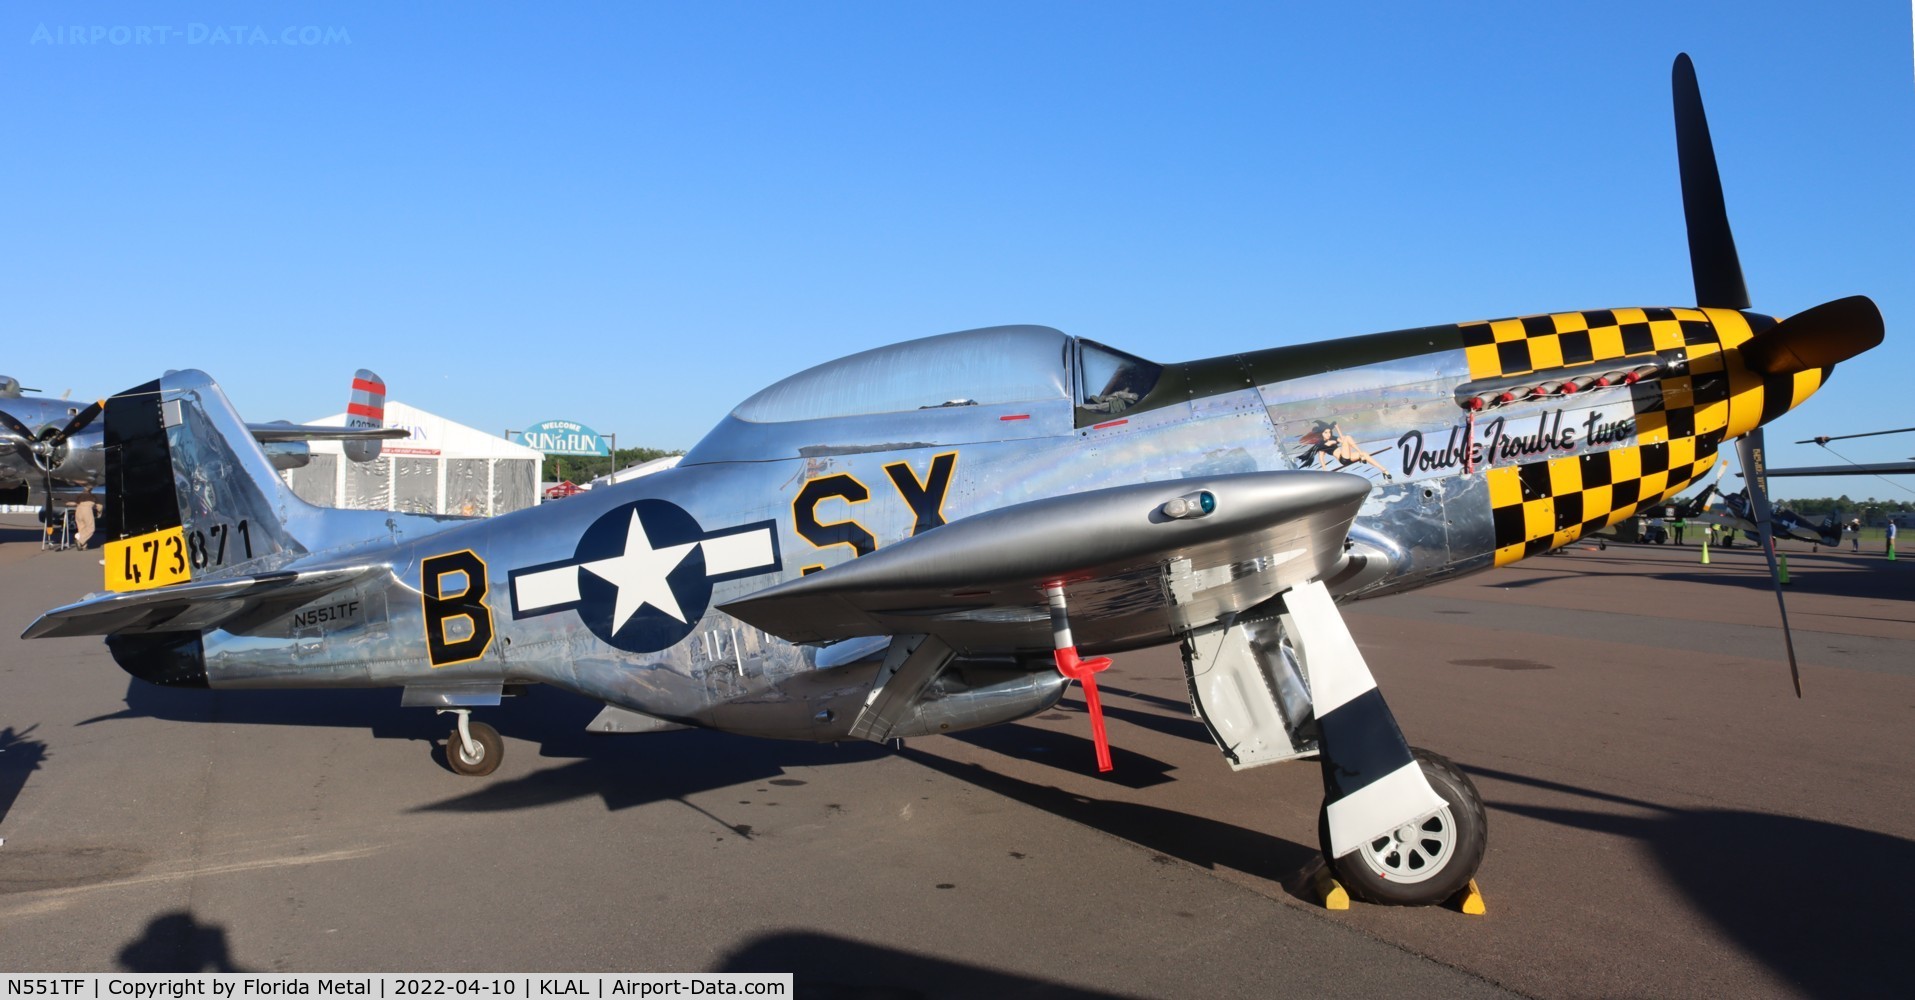 N551TF, 1944 North American TF-51D Mustang C/N 122-31199, Double Trouble II